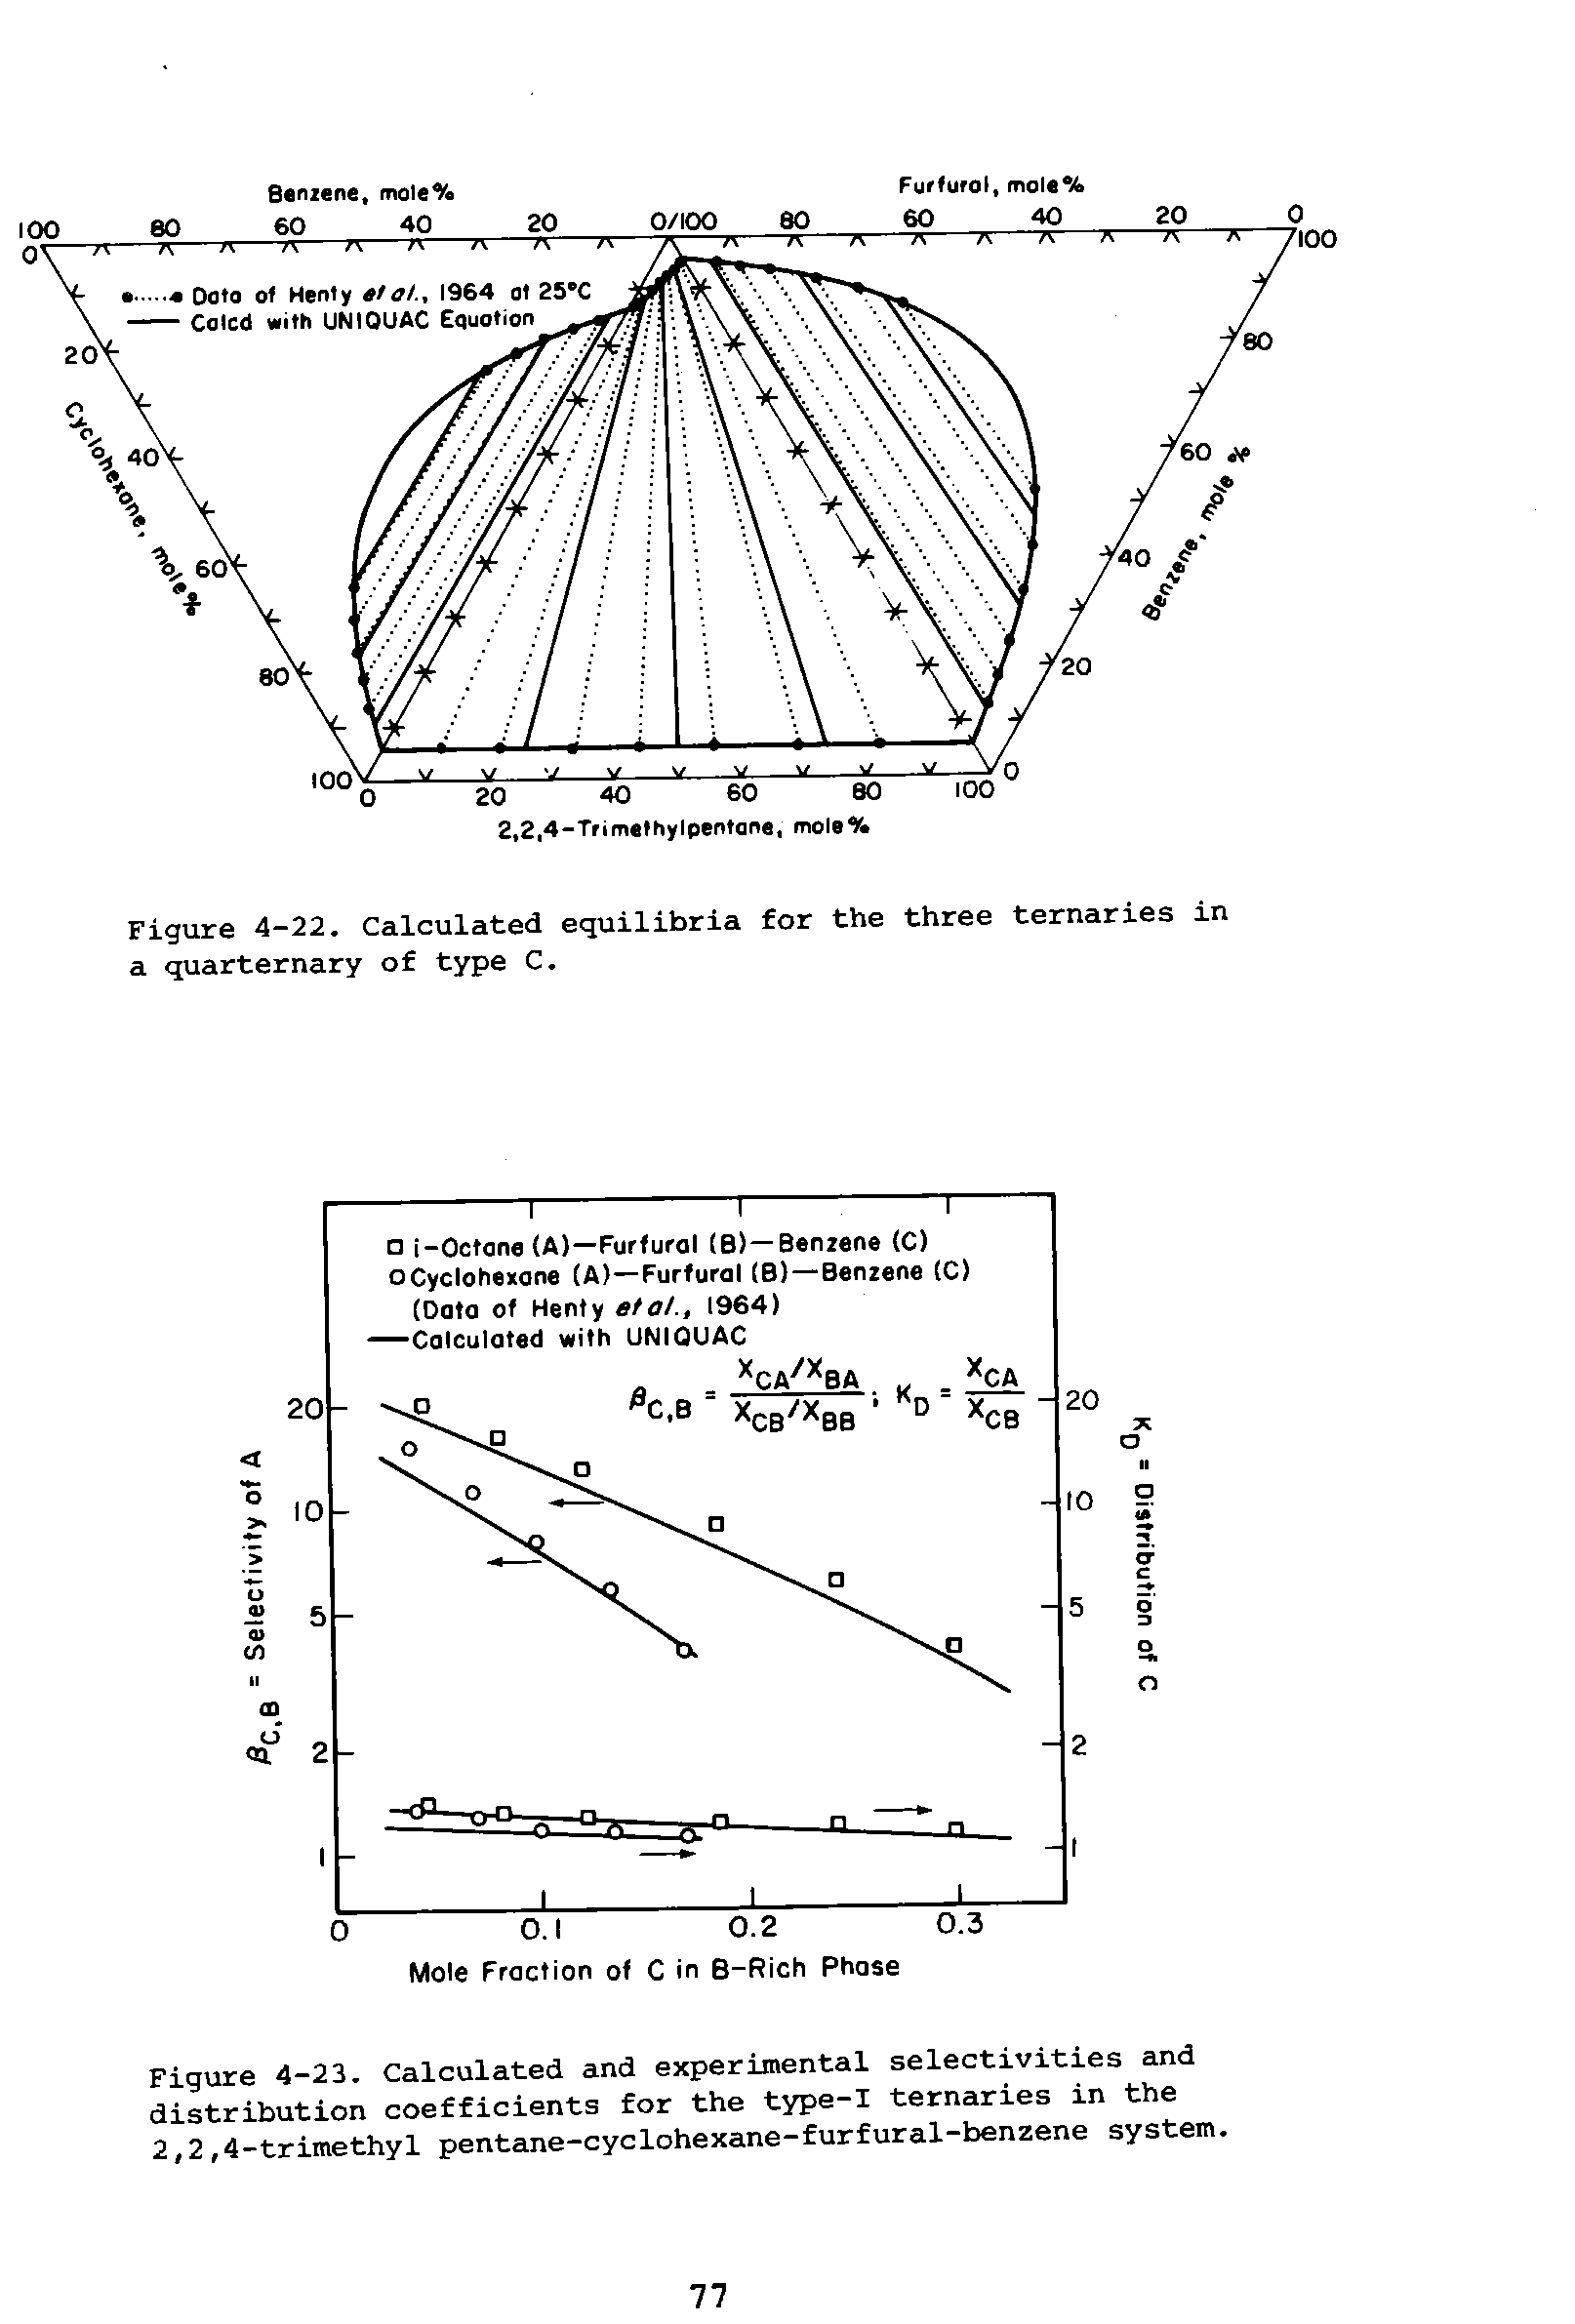 Figure 4-22. Calculated equilibria for the three ternaries in a quarternary of type C.